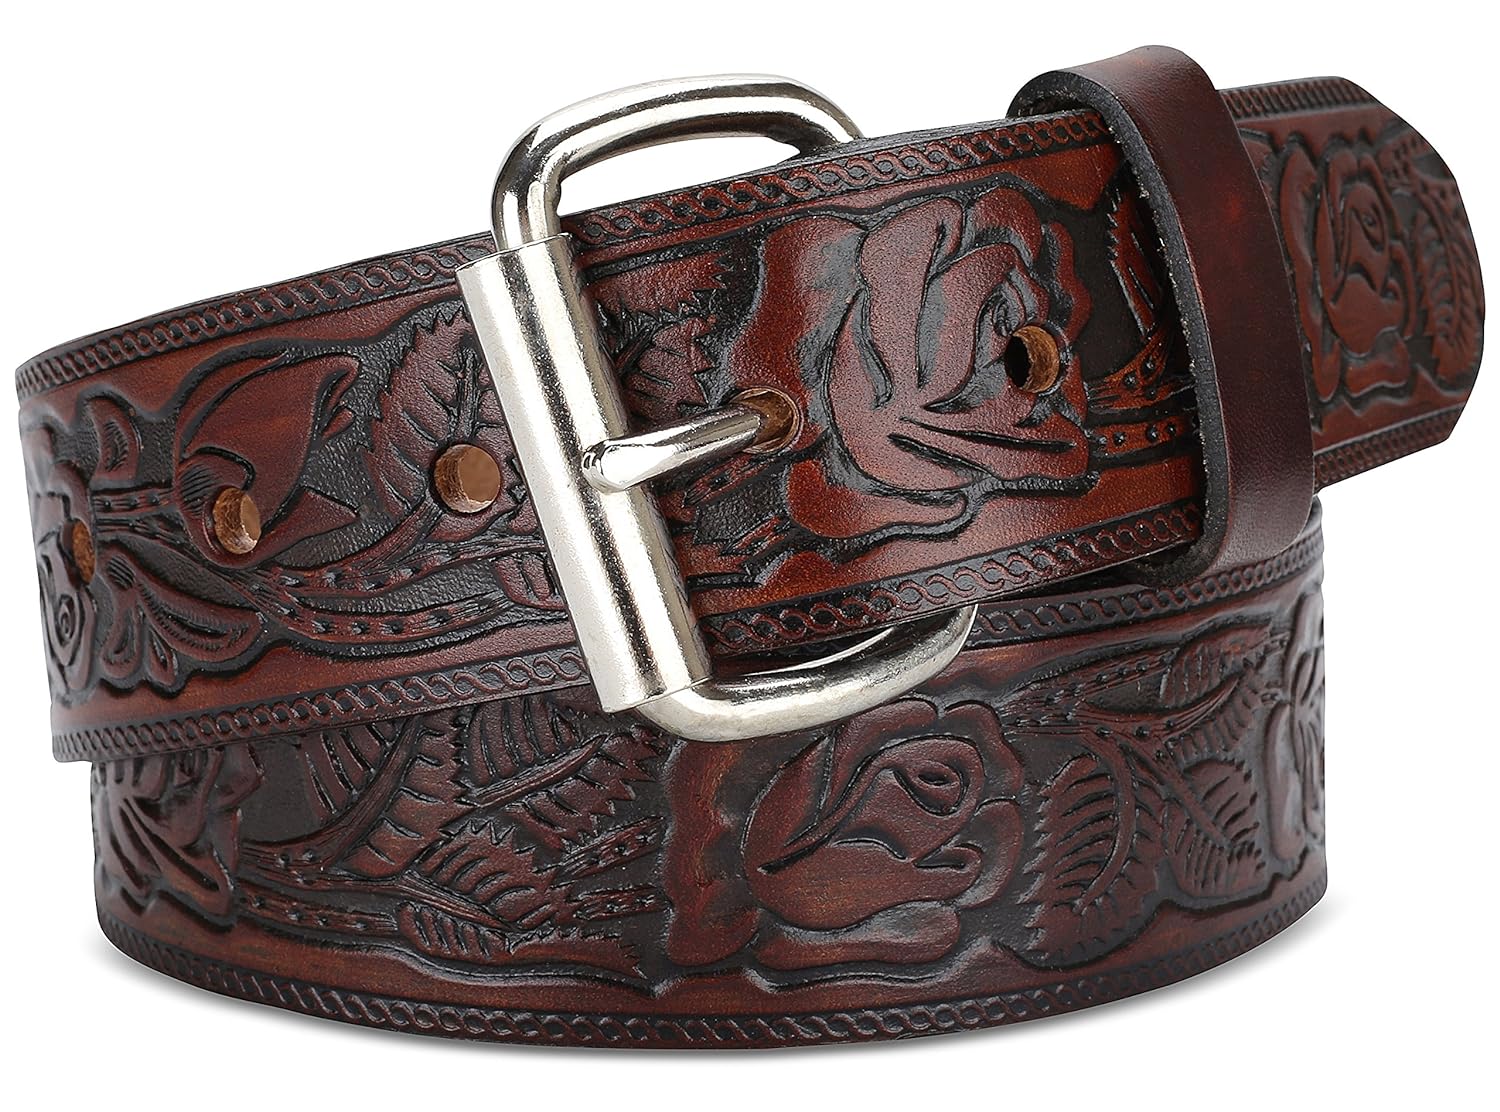 “Cinch It Right: Choosing the Perfect Belt for Your Outfit”